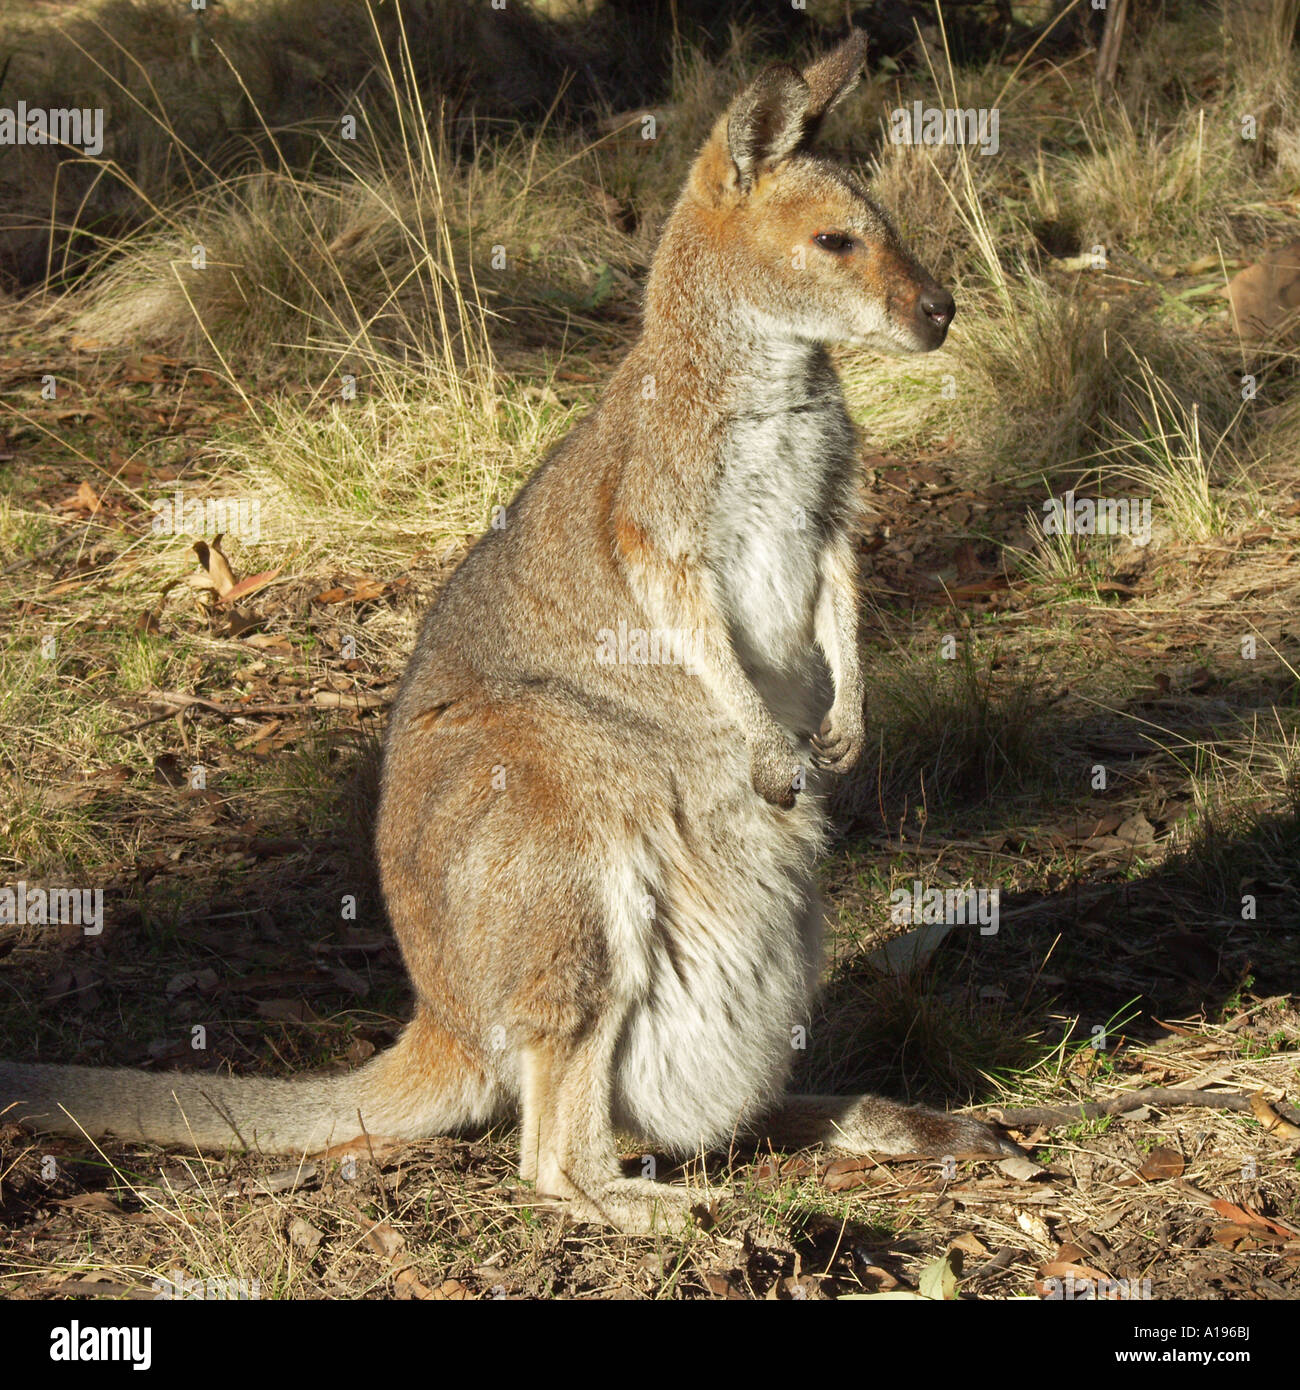 An Australian red necked wallaby with a young joey in her pouch in the wild among the forests of a wilderness national park Stock Photo